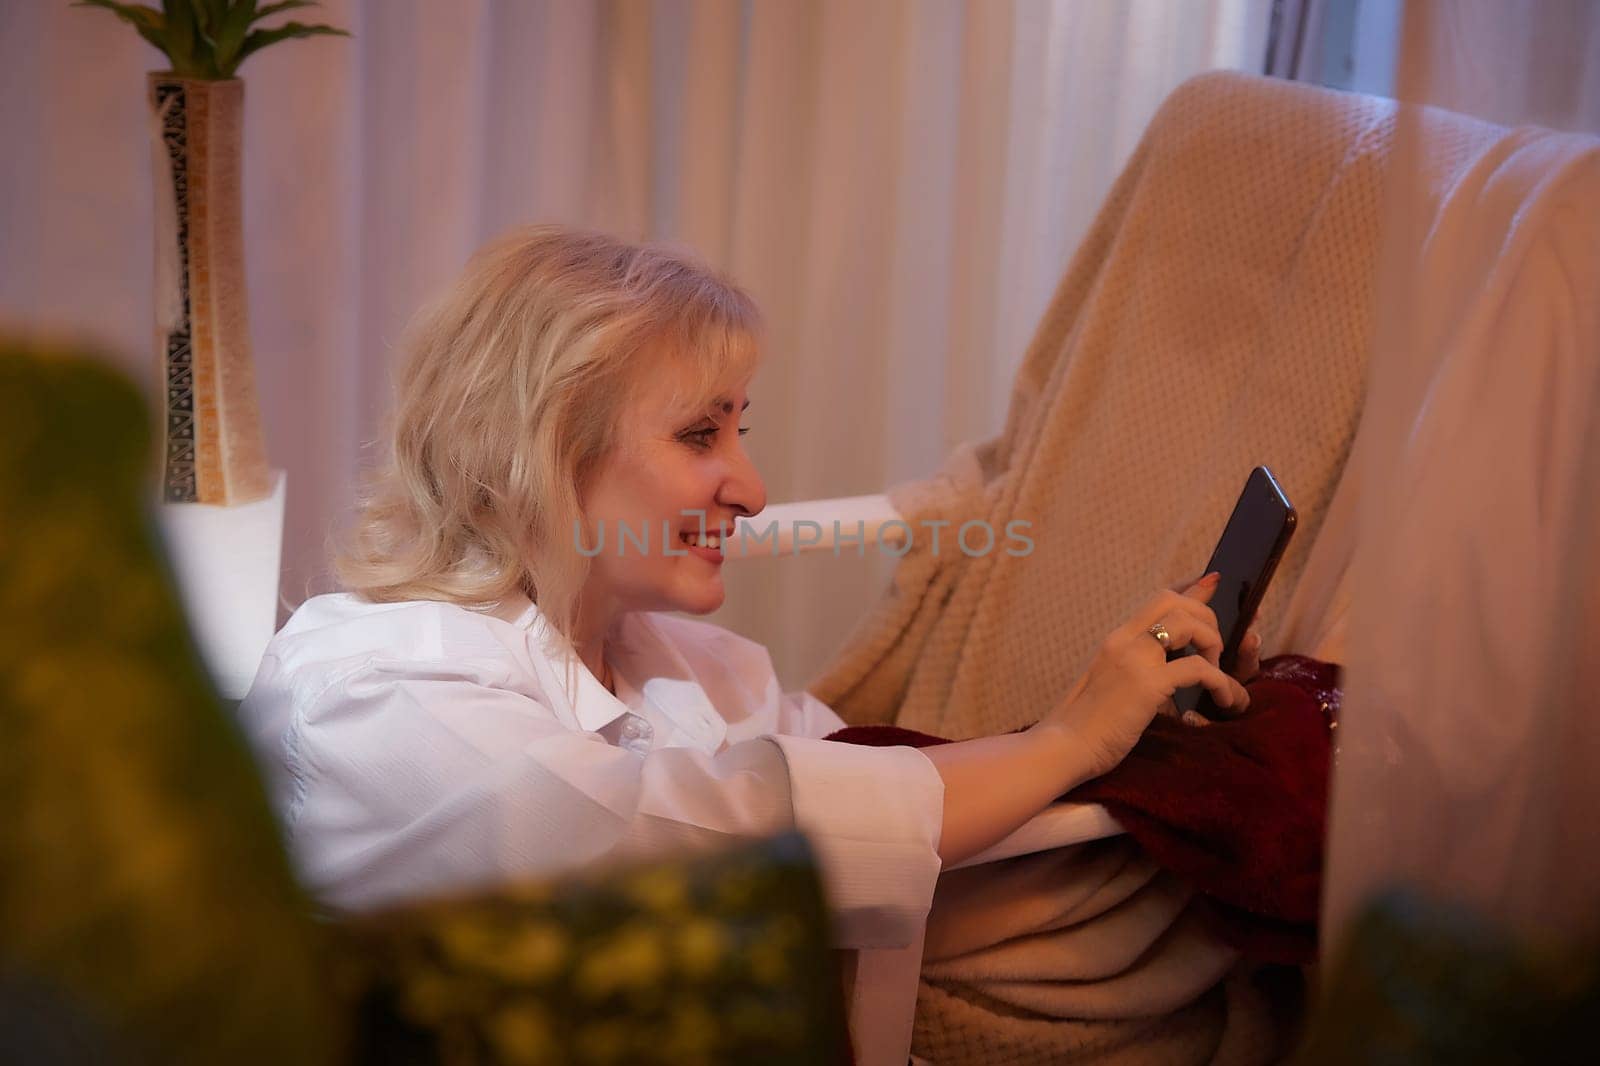 Adult mature woman of 40 or 60 years old with cell phone smartphone in casual dress white shirt and blue jeans in calm cozy evening atmosphere room. Interior with curtains and soft warm lamp